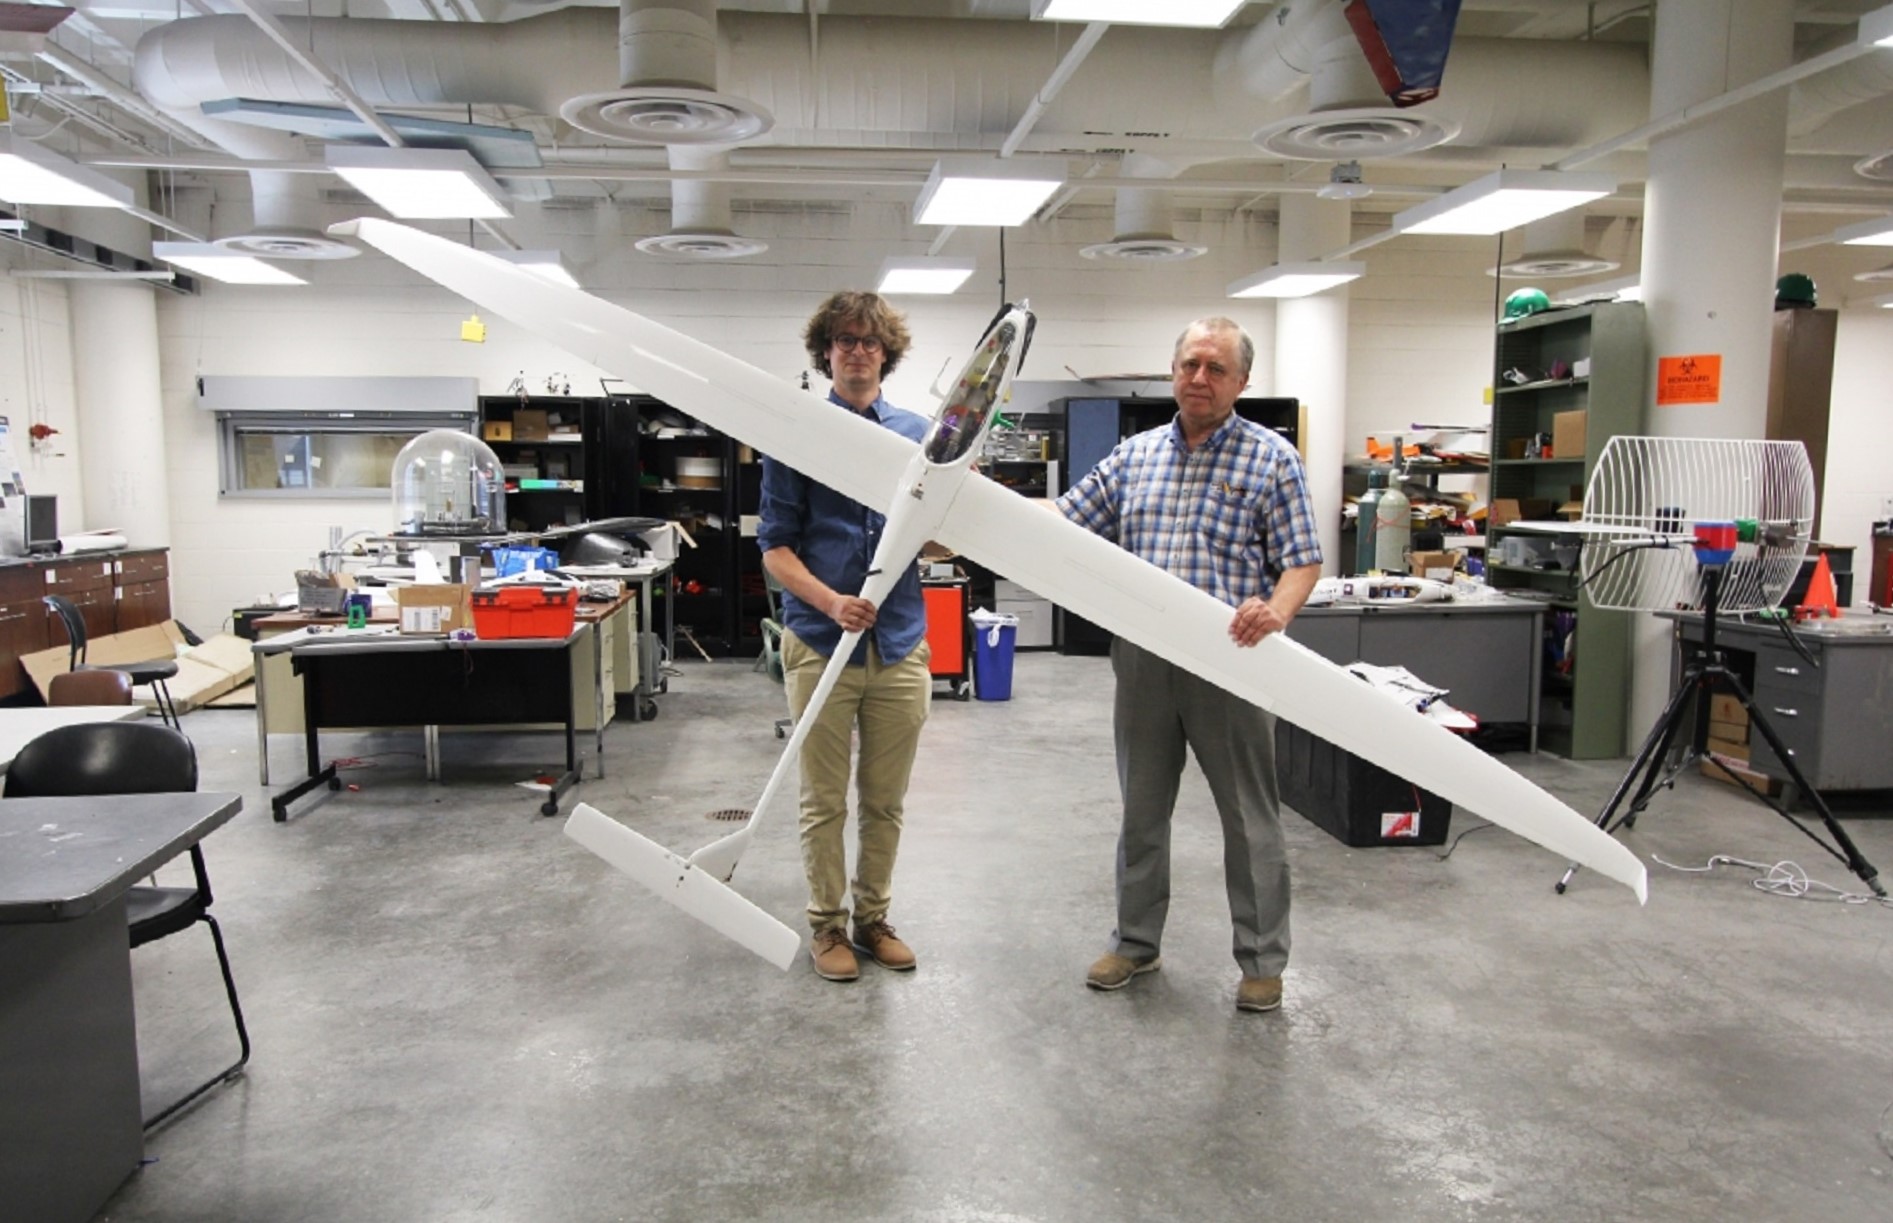 This sailplane could cruise Mars for months on only wind